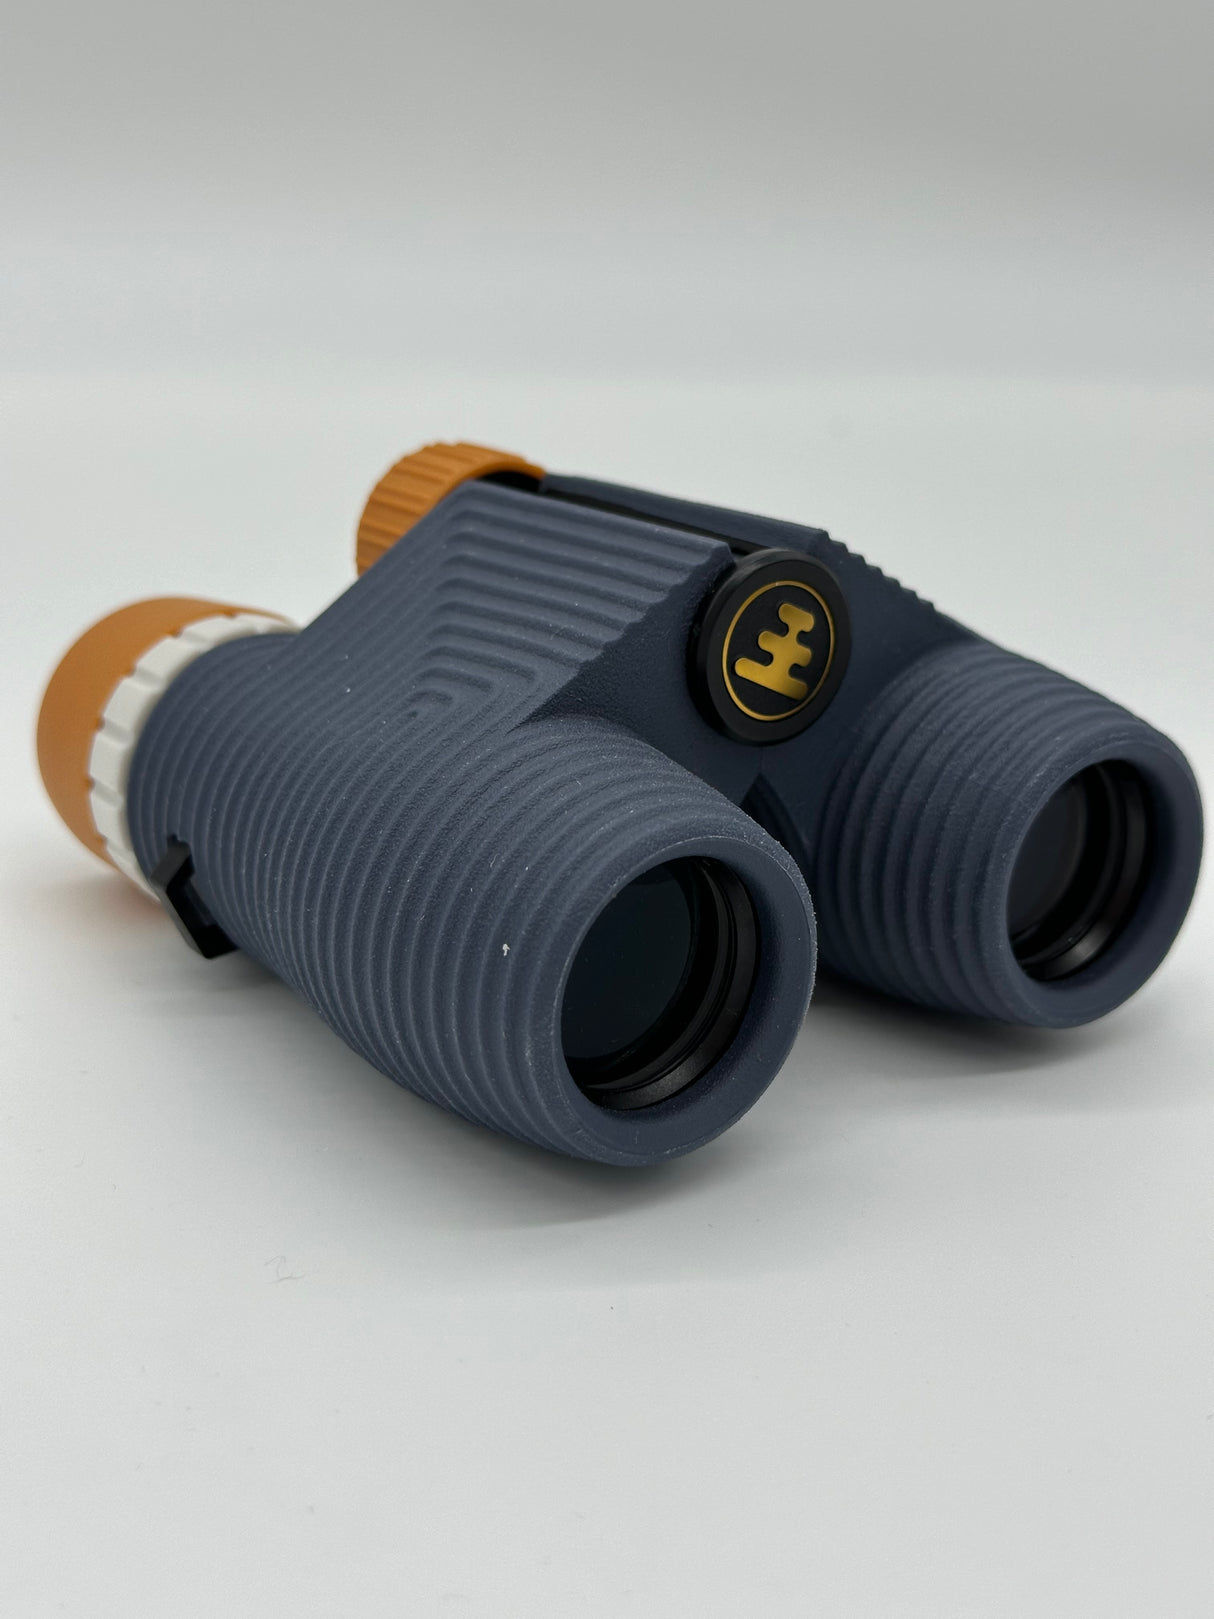 PRE-ORDER: The Woods Maine® x Nocs Provisions 8x25 Standard Issue Binoculars